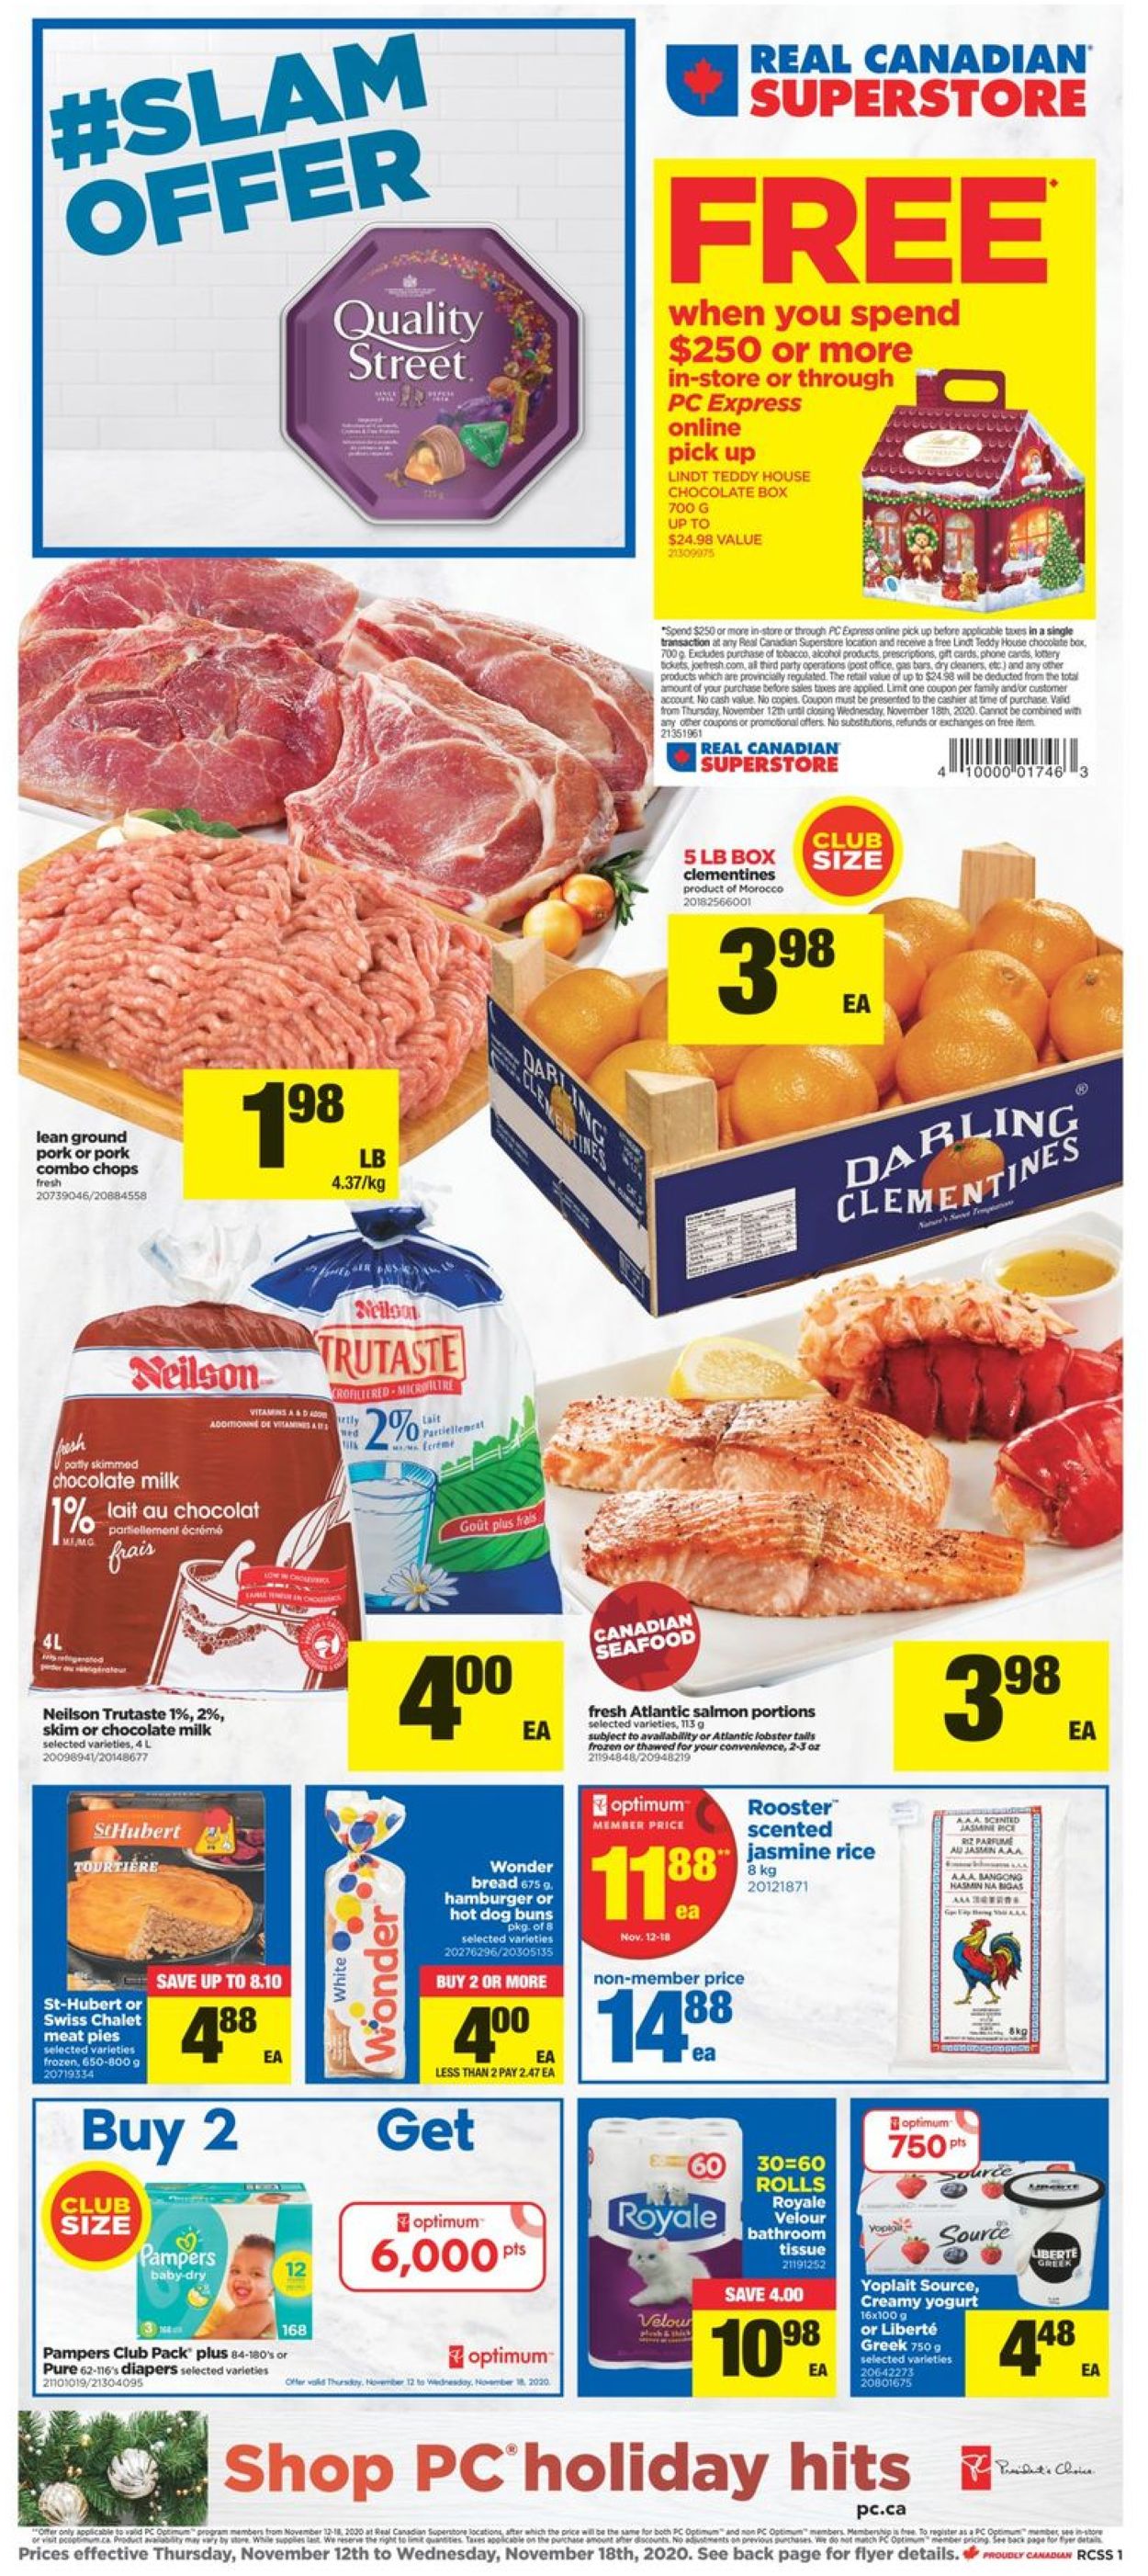 Real Canadian Superstore - Holiday 2020 Flyer - 11/12-11/18/2020